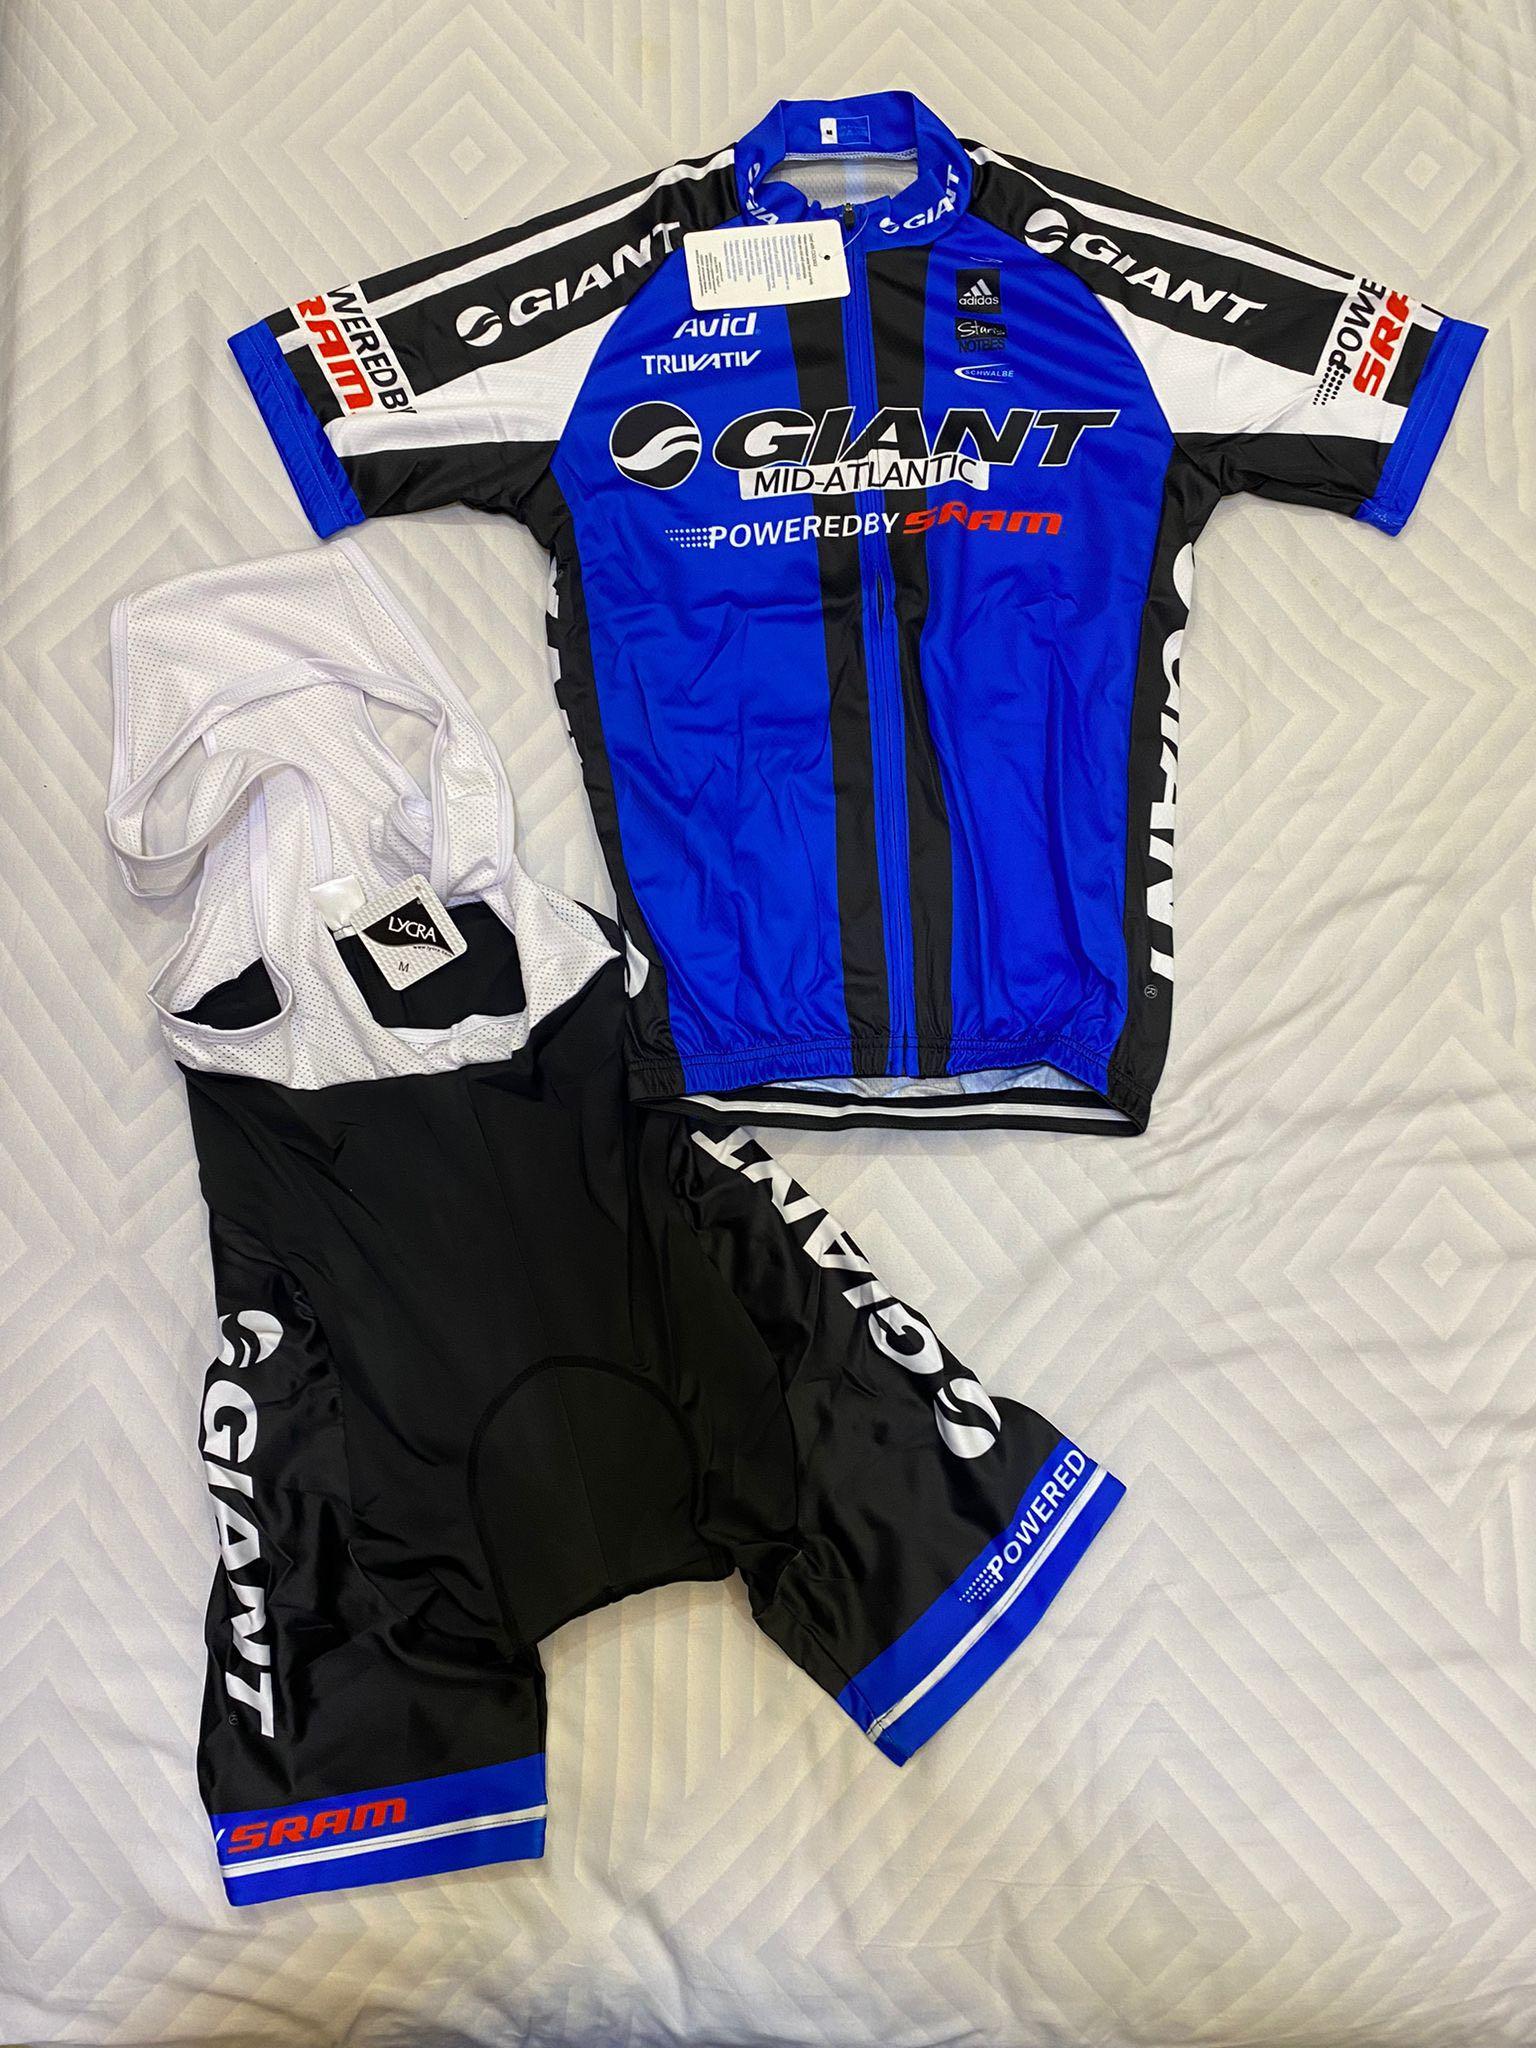 Giant Cycling Jersey, Sports Equipment, Bicycles & Parts, Parts ...